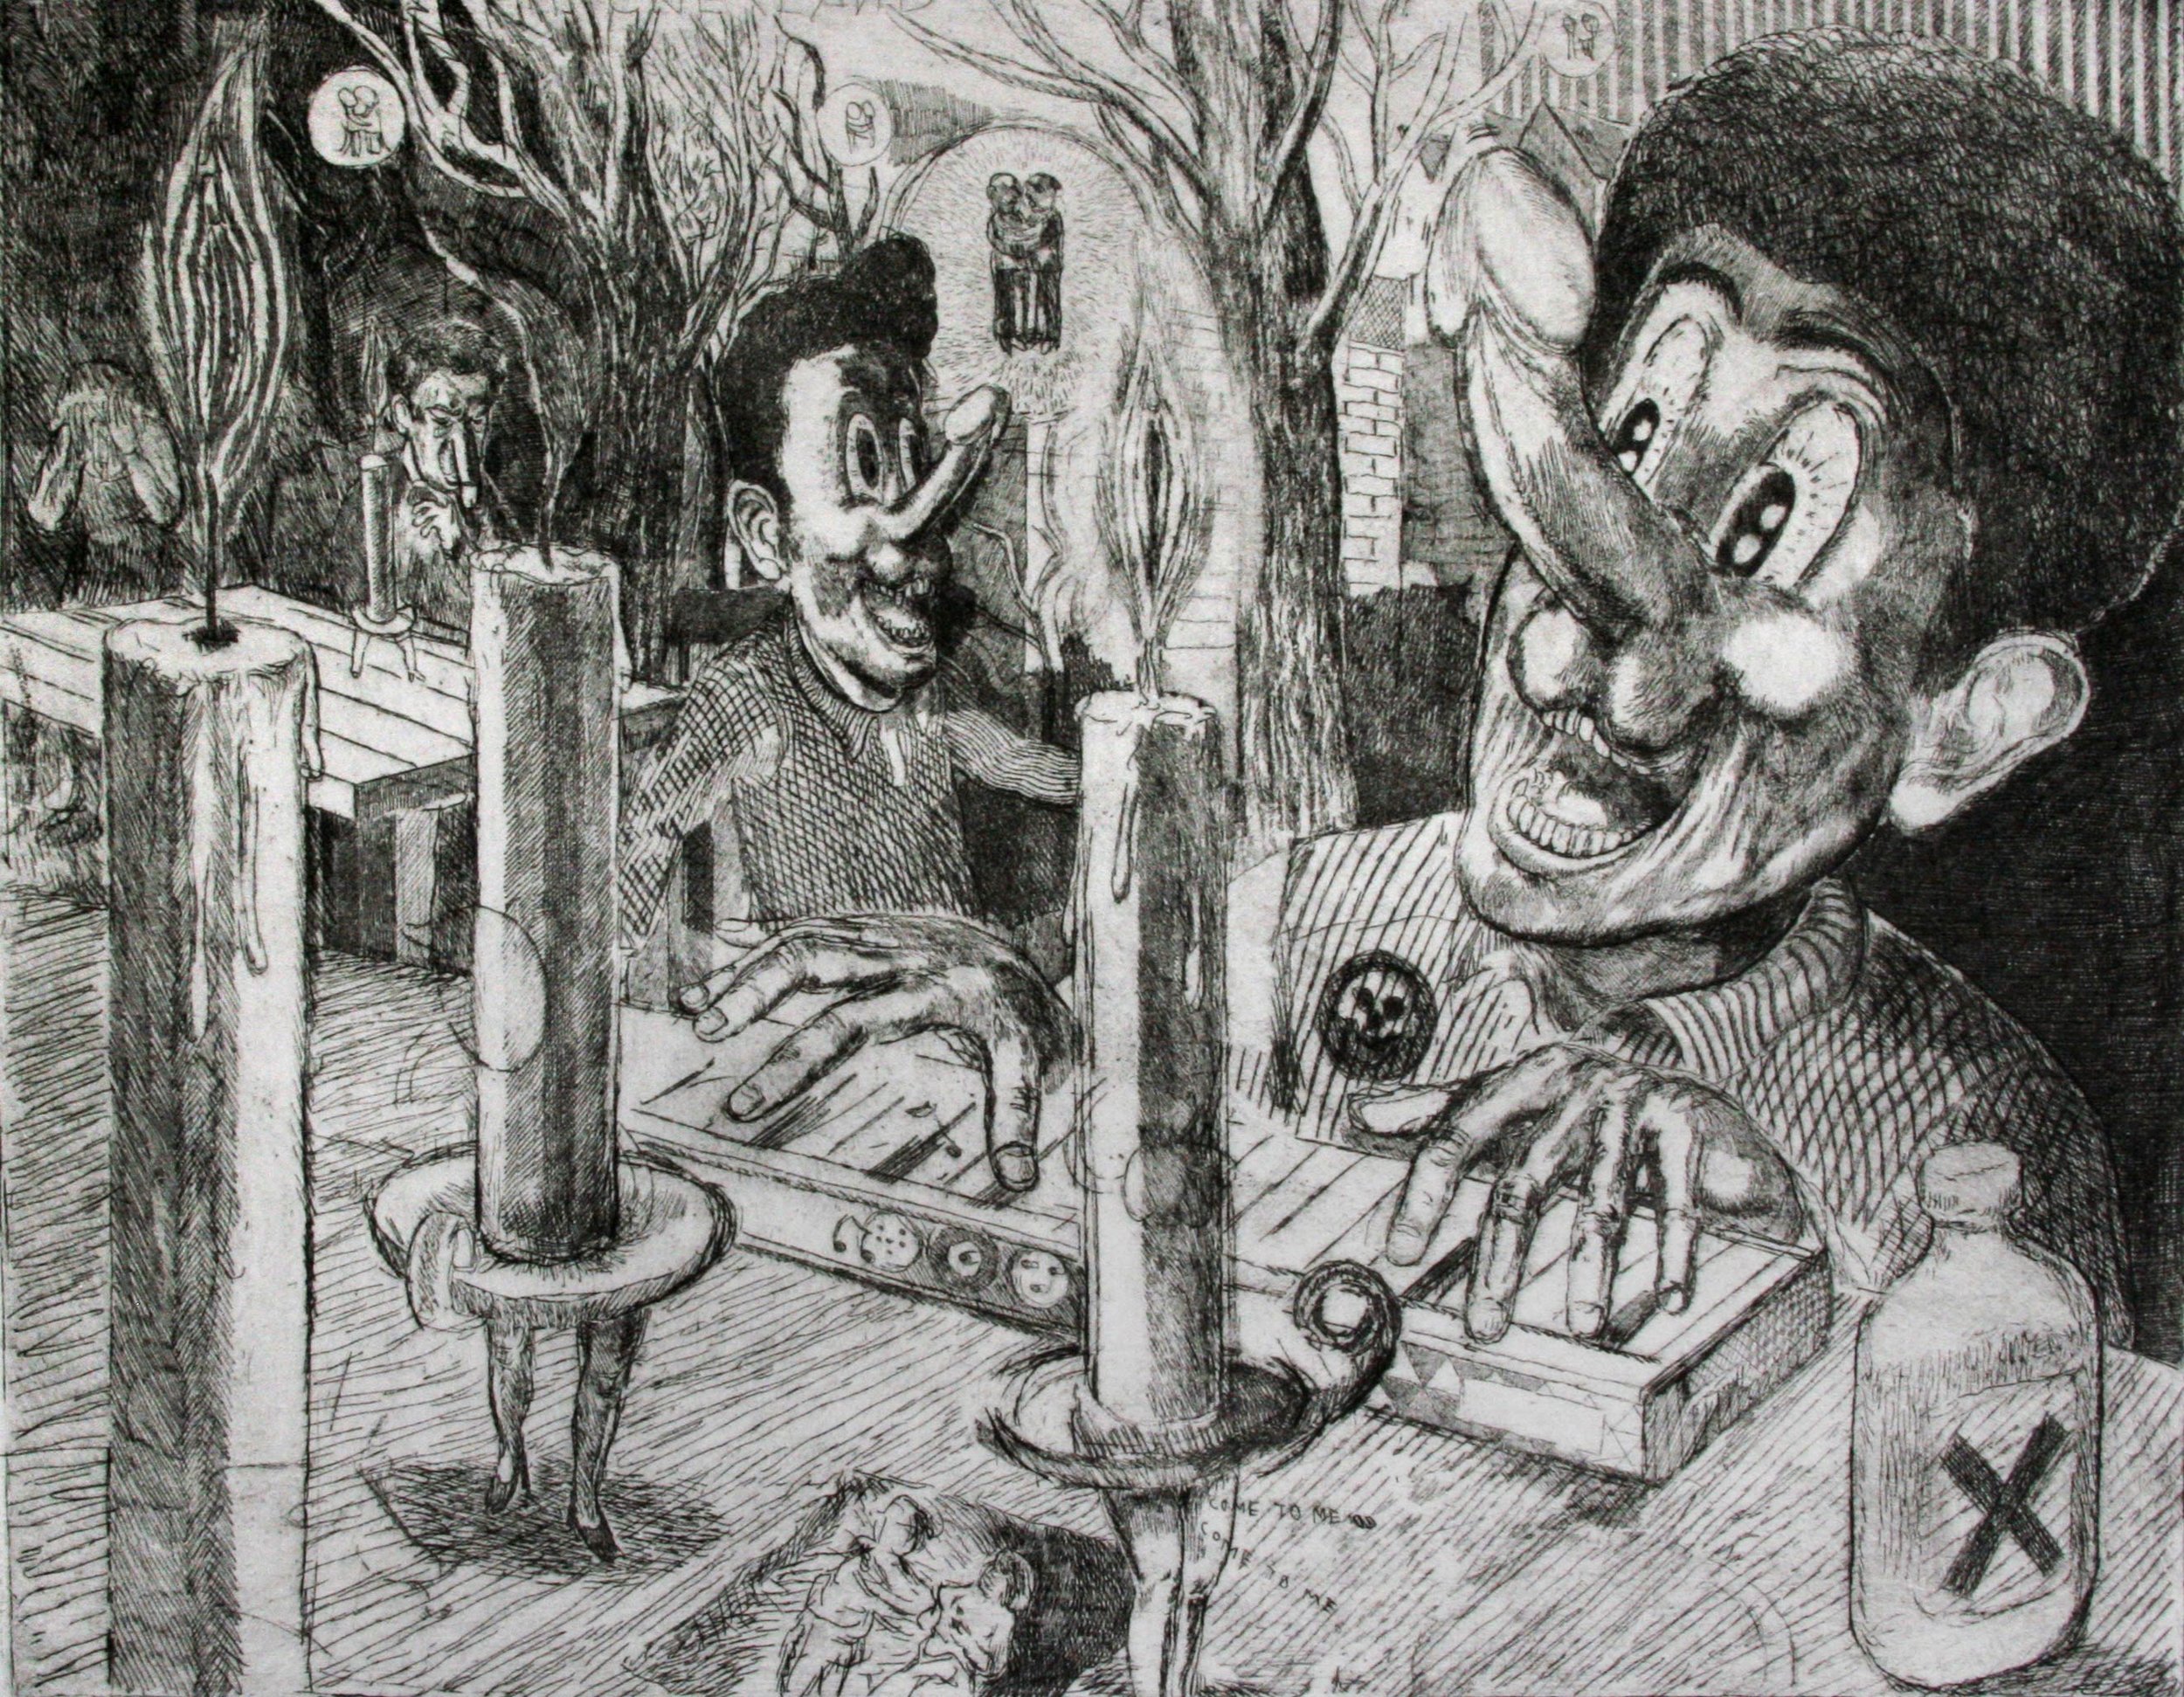    ‘Mr Dicky and the Candle Ladies’ 2012   Engraving and etching on paper. 29 x 39 cm 